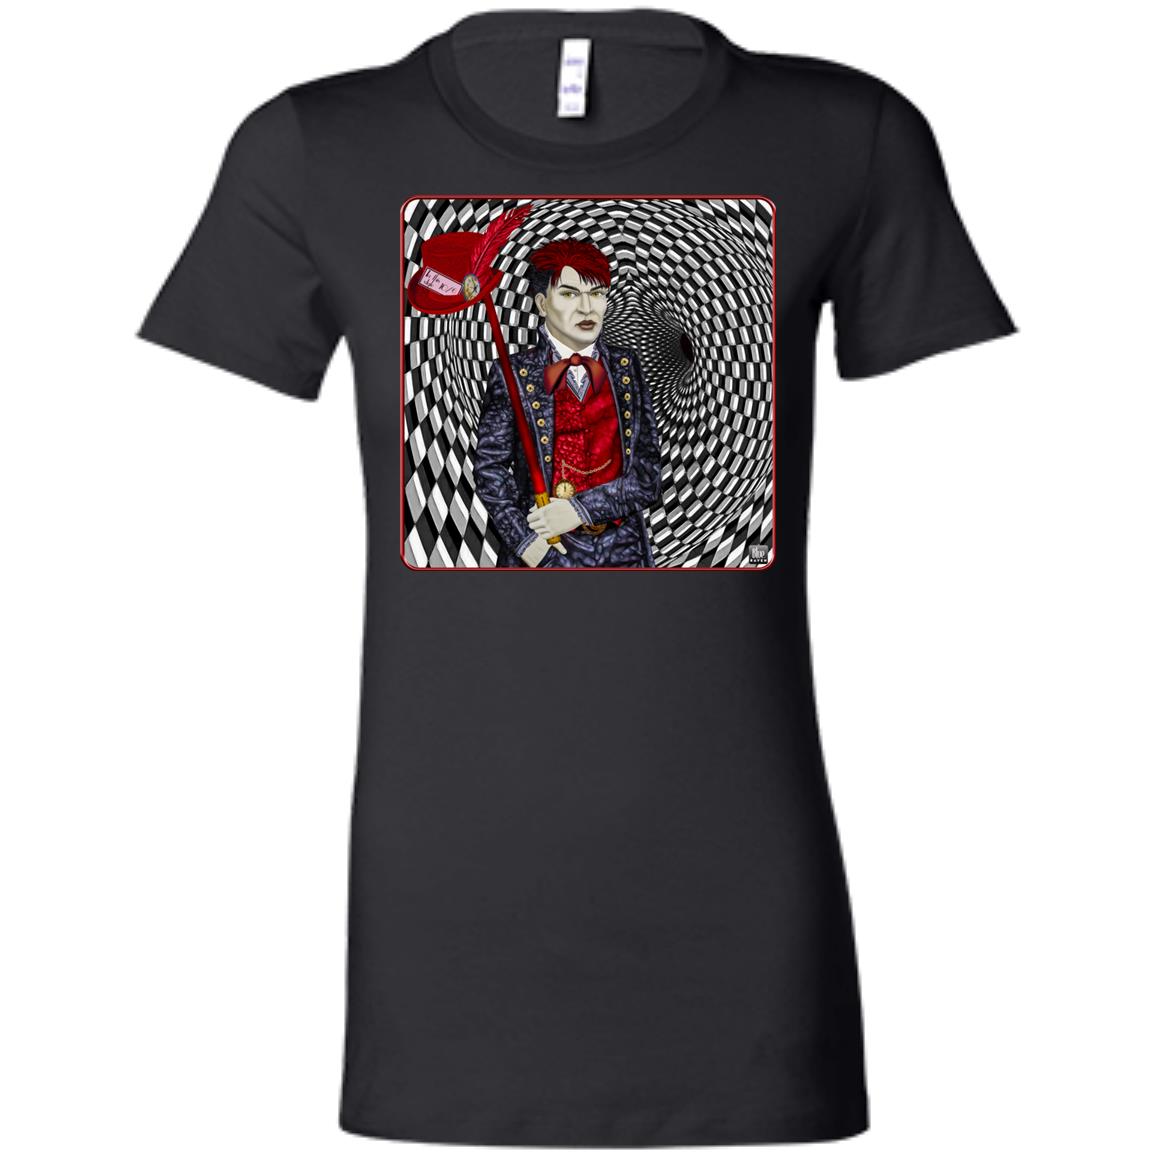 PORTRAIT OF A MAD HATTER - Women's Fitted T-Shirt